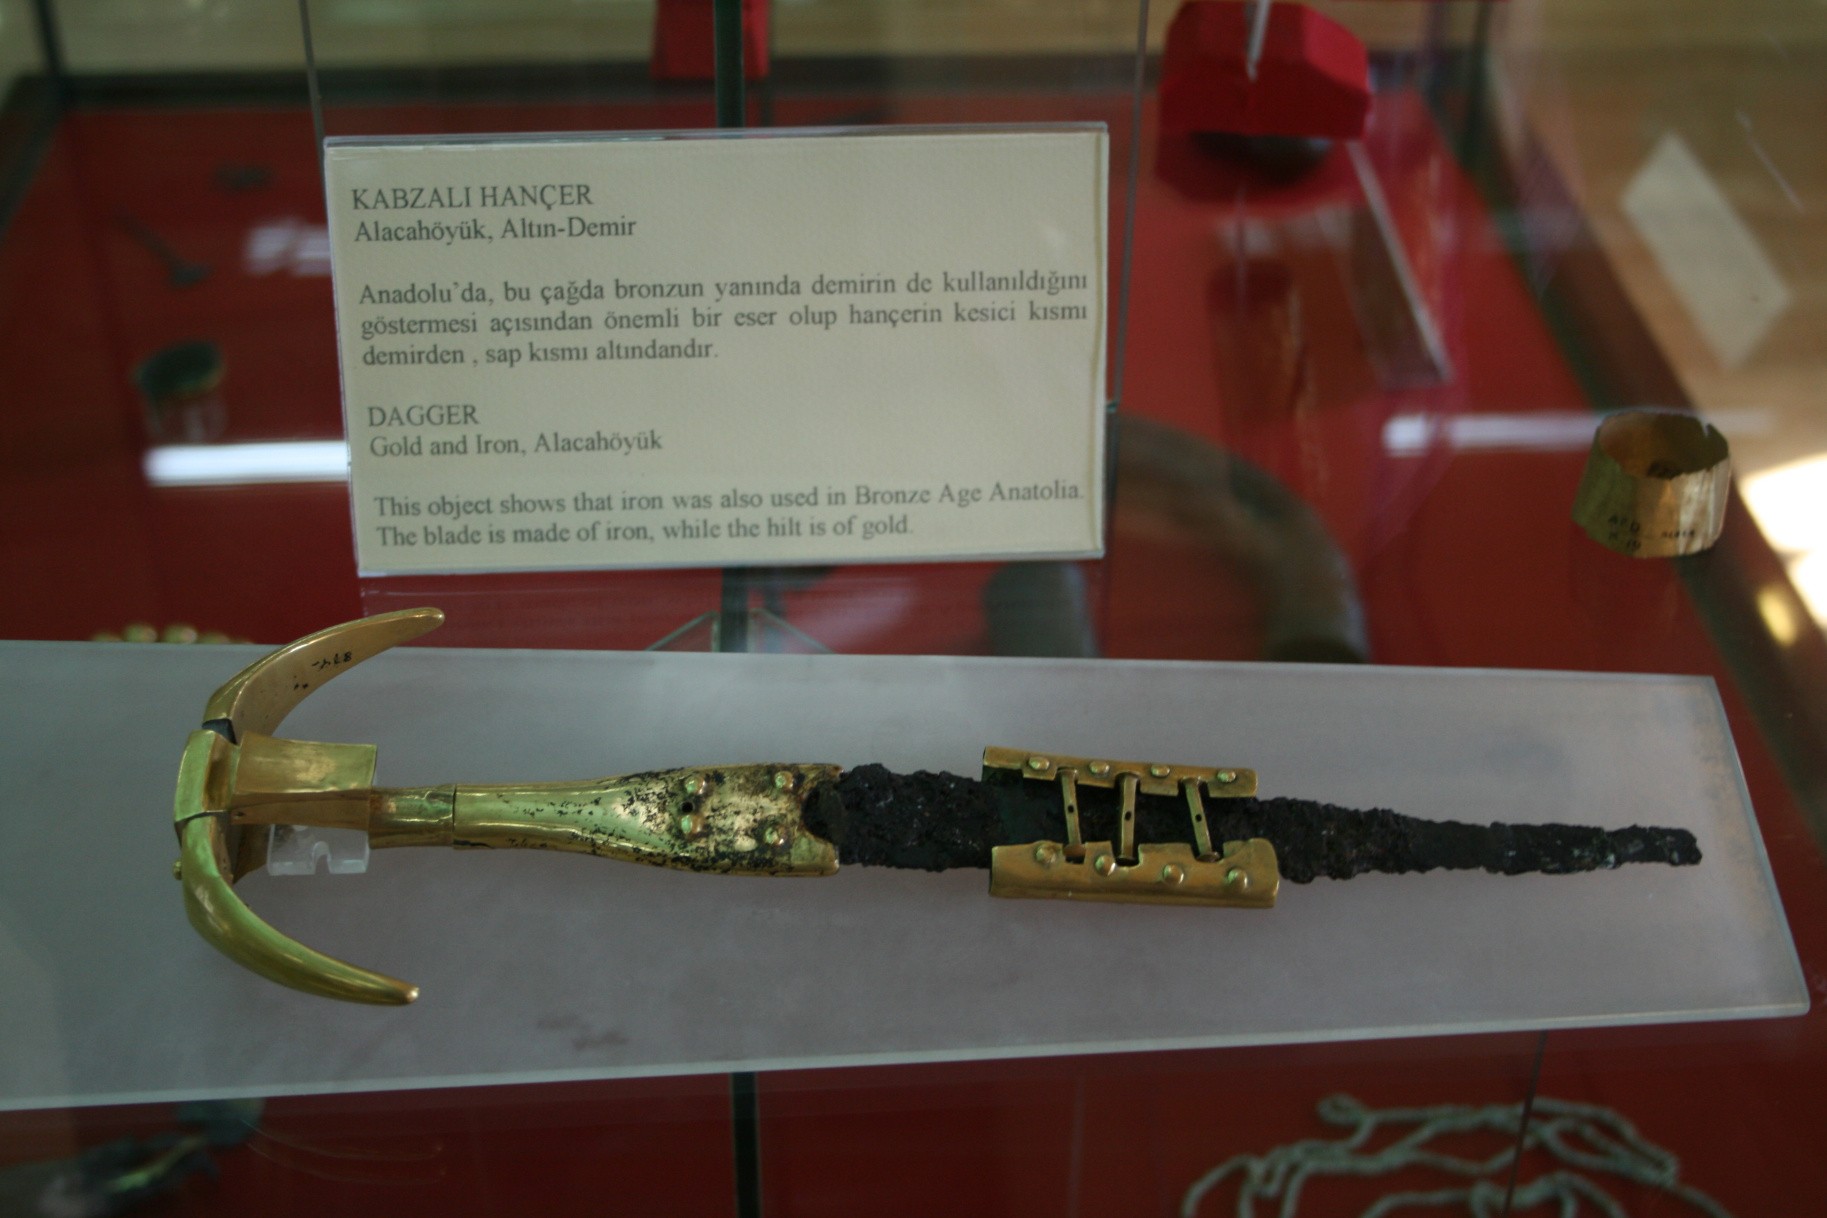 A dagger from Alacahöyük, an archaeological site in Turkey. It is made up of iron and gold, lenght 18.5 cm. It dates back to Bronze Age, 2500-2000 BC.